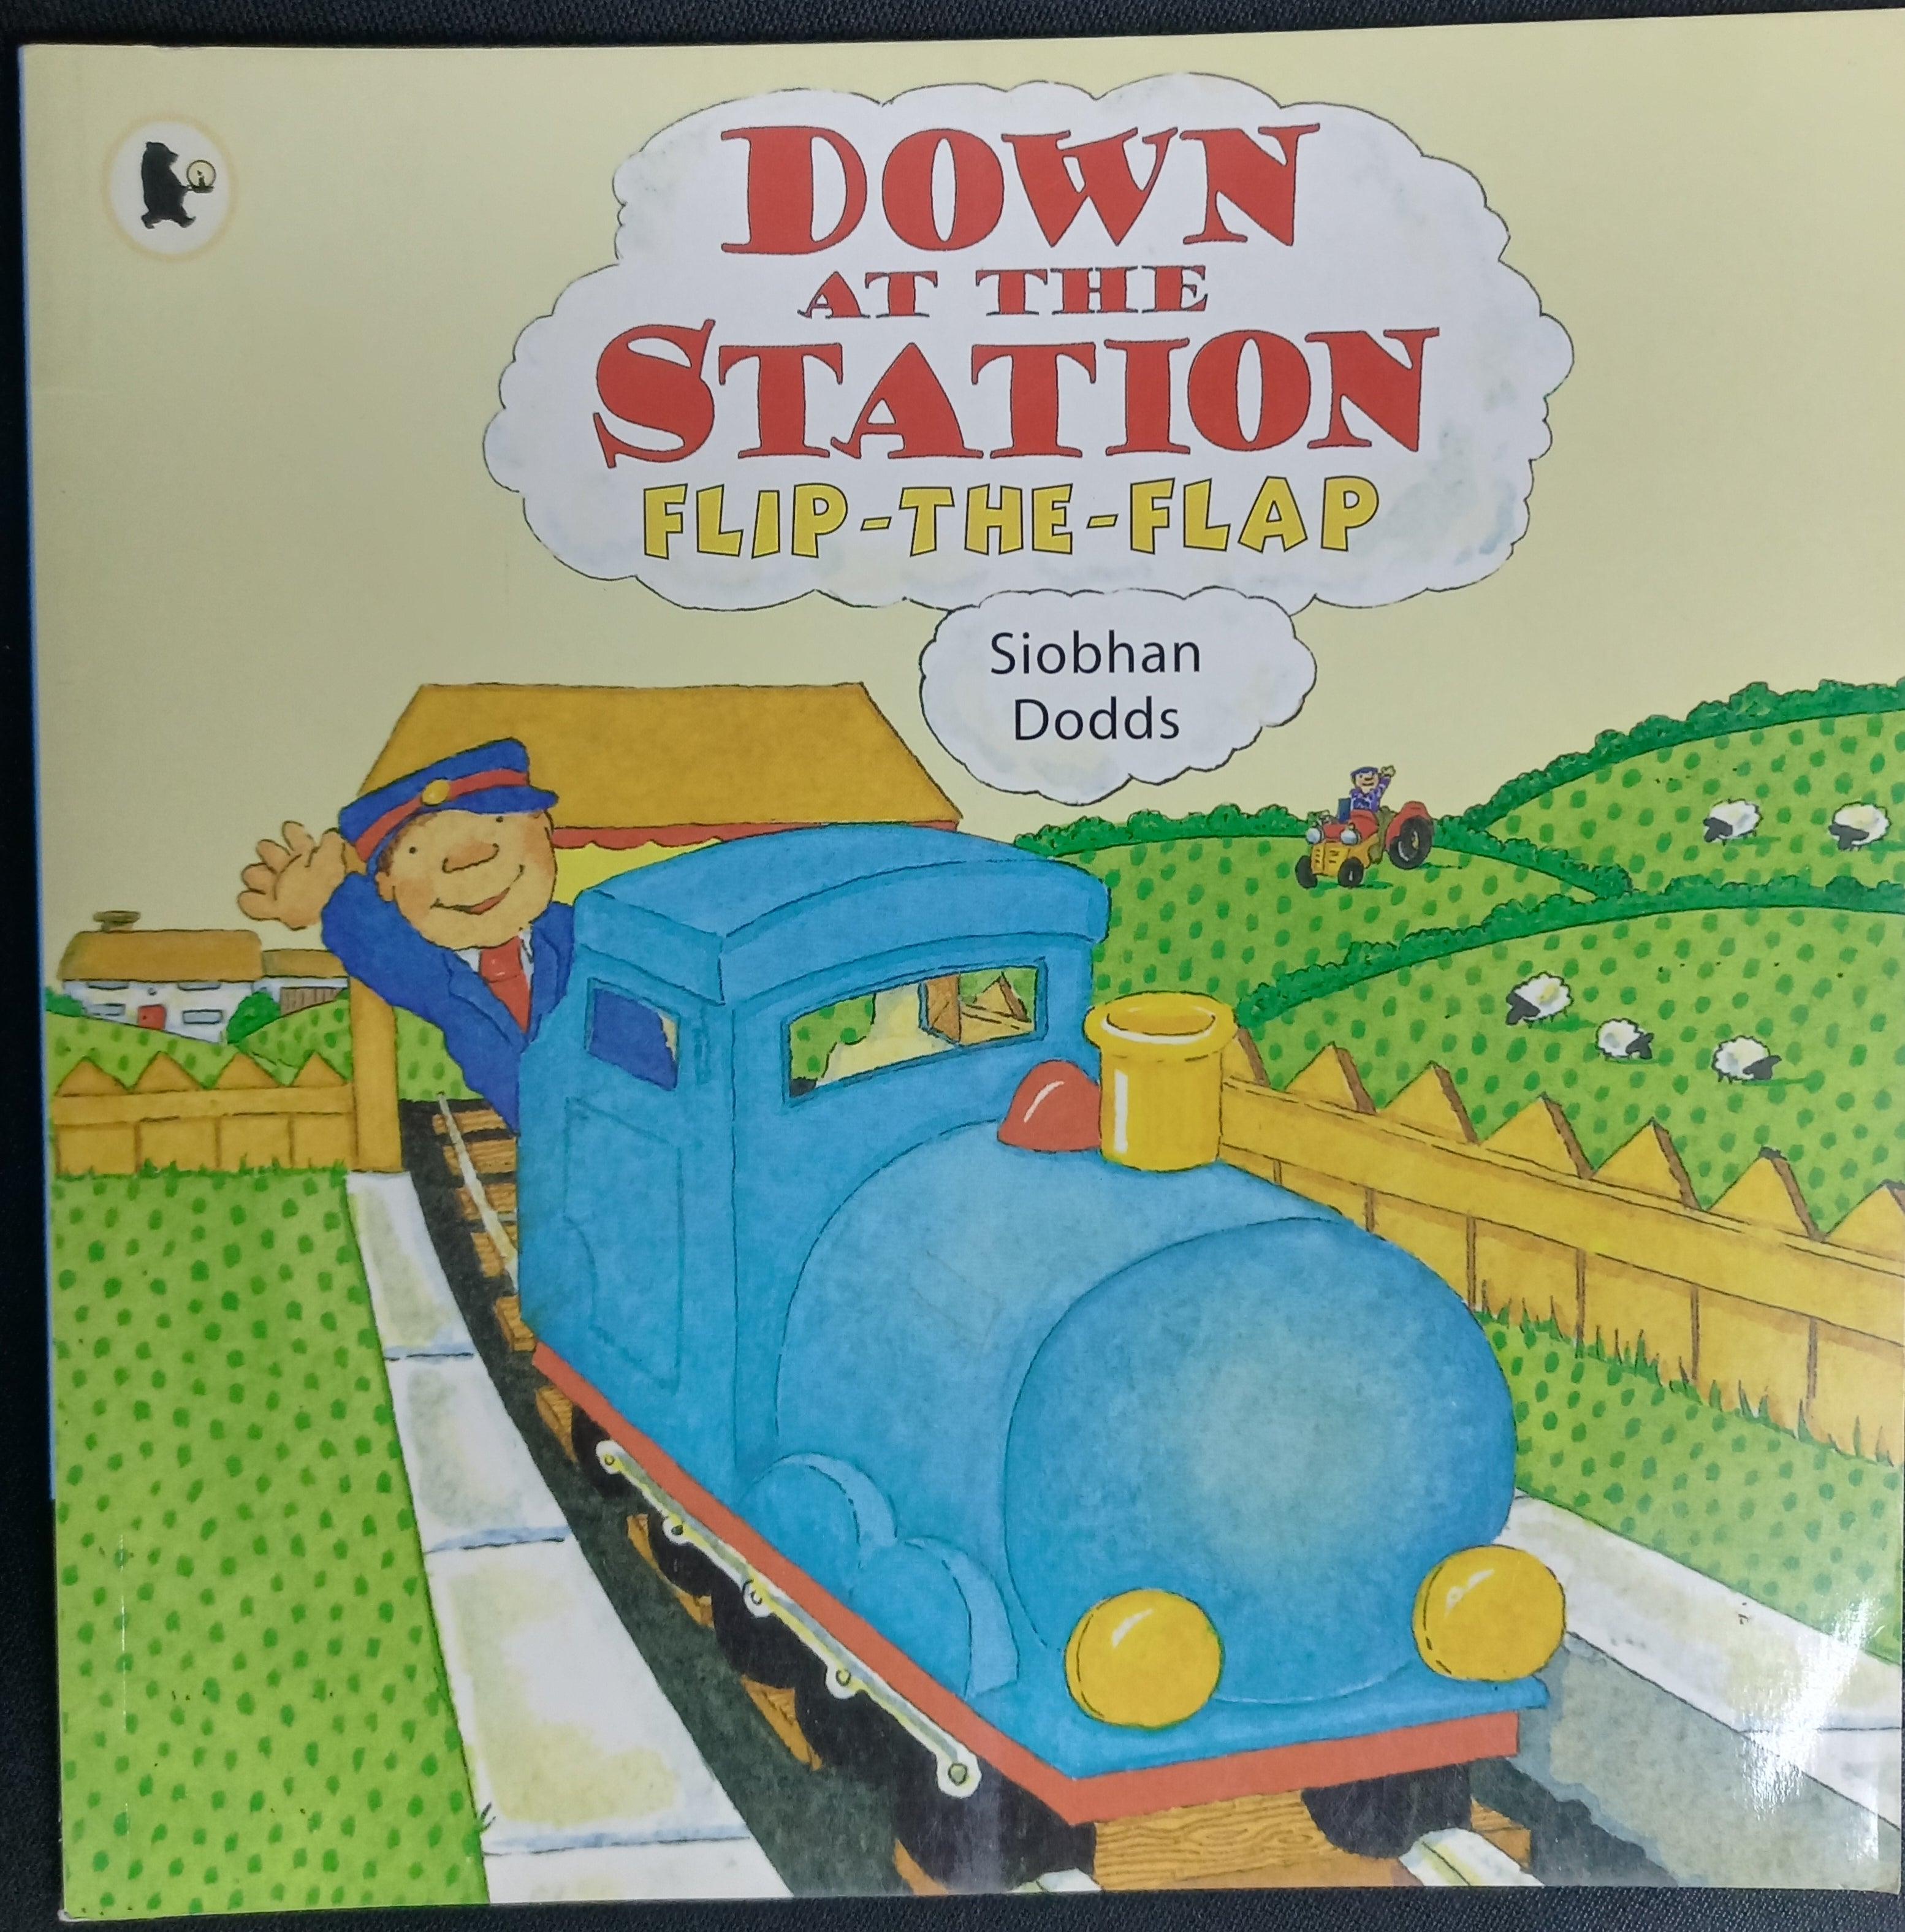 at　Down　-The-Flap　the　Station